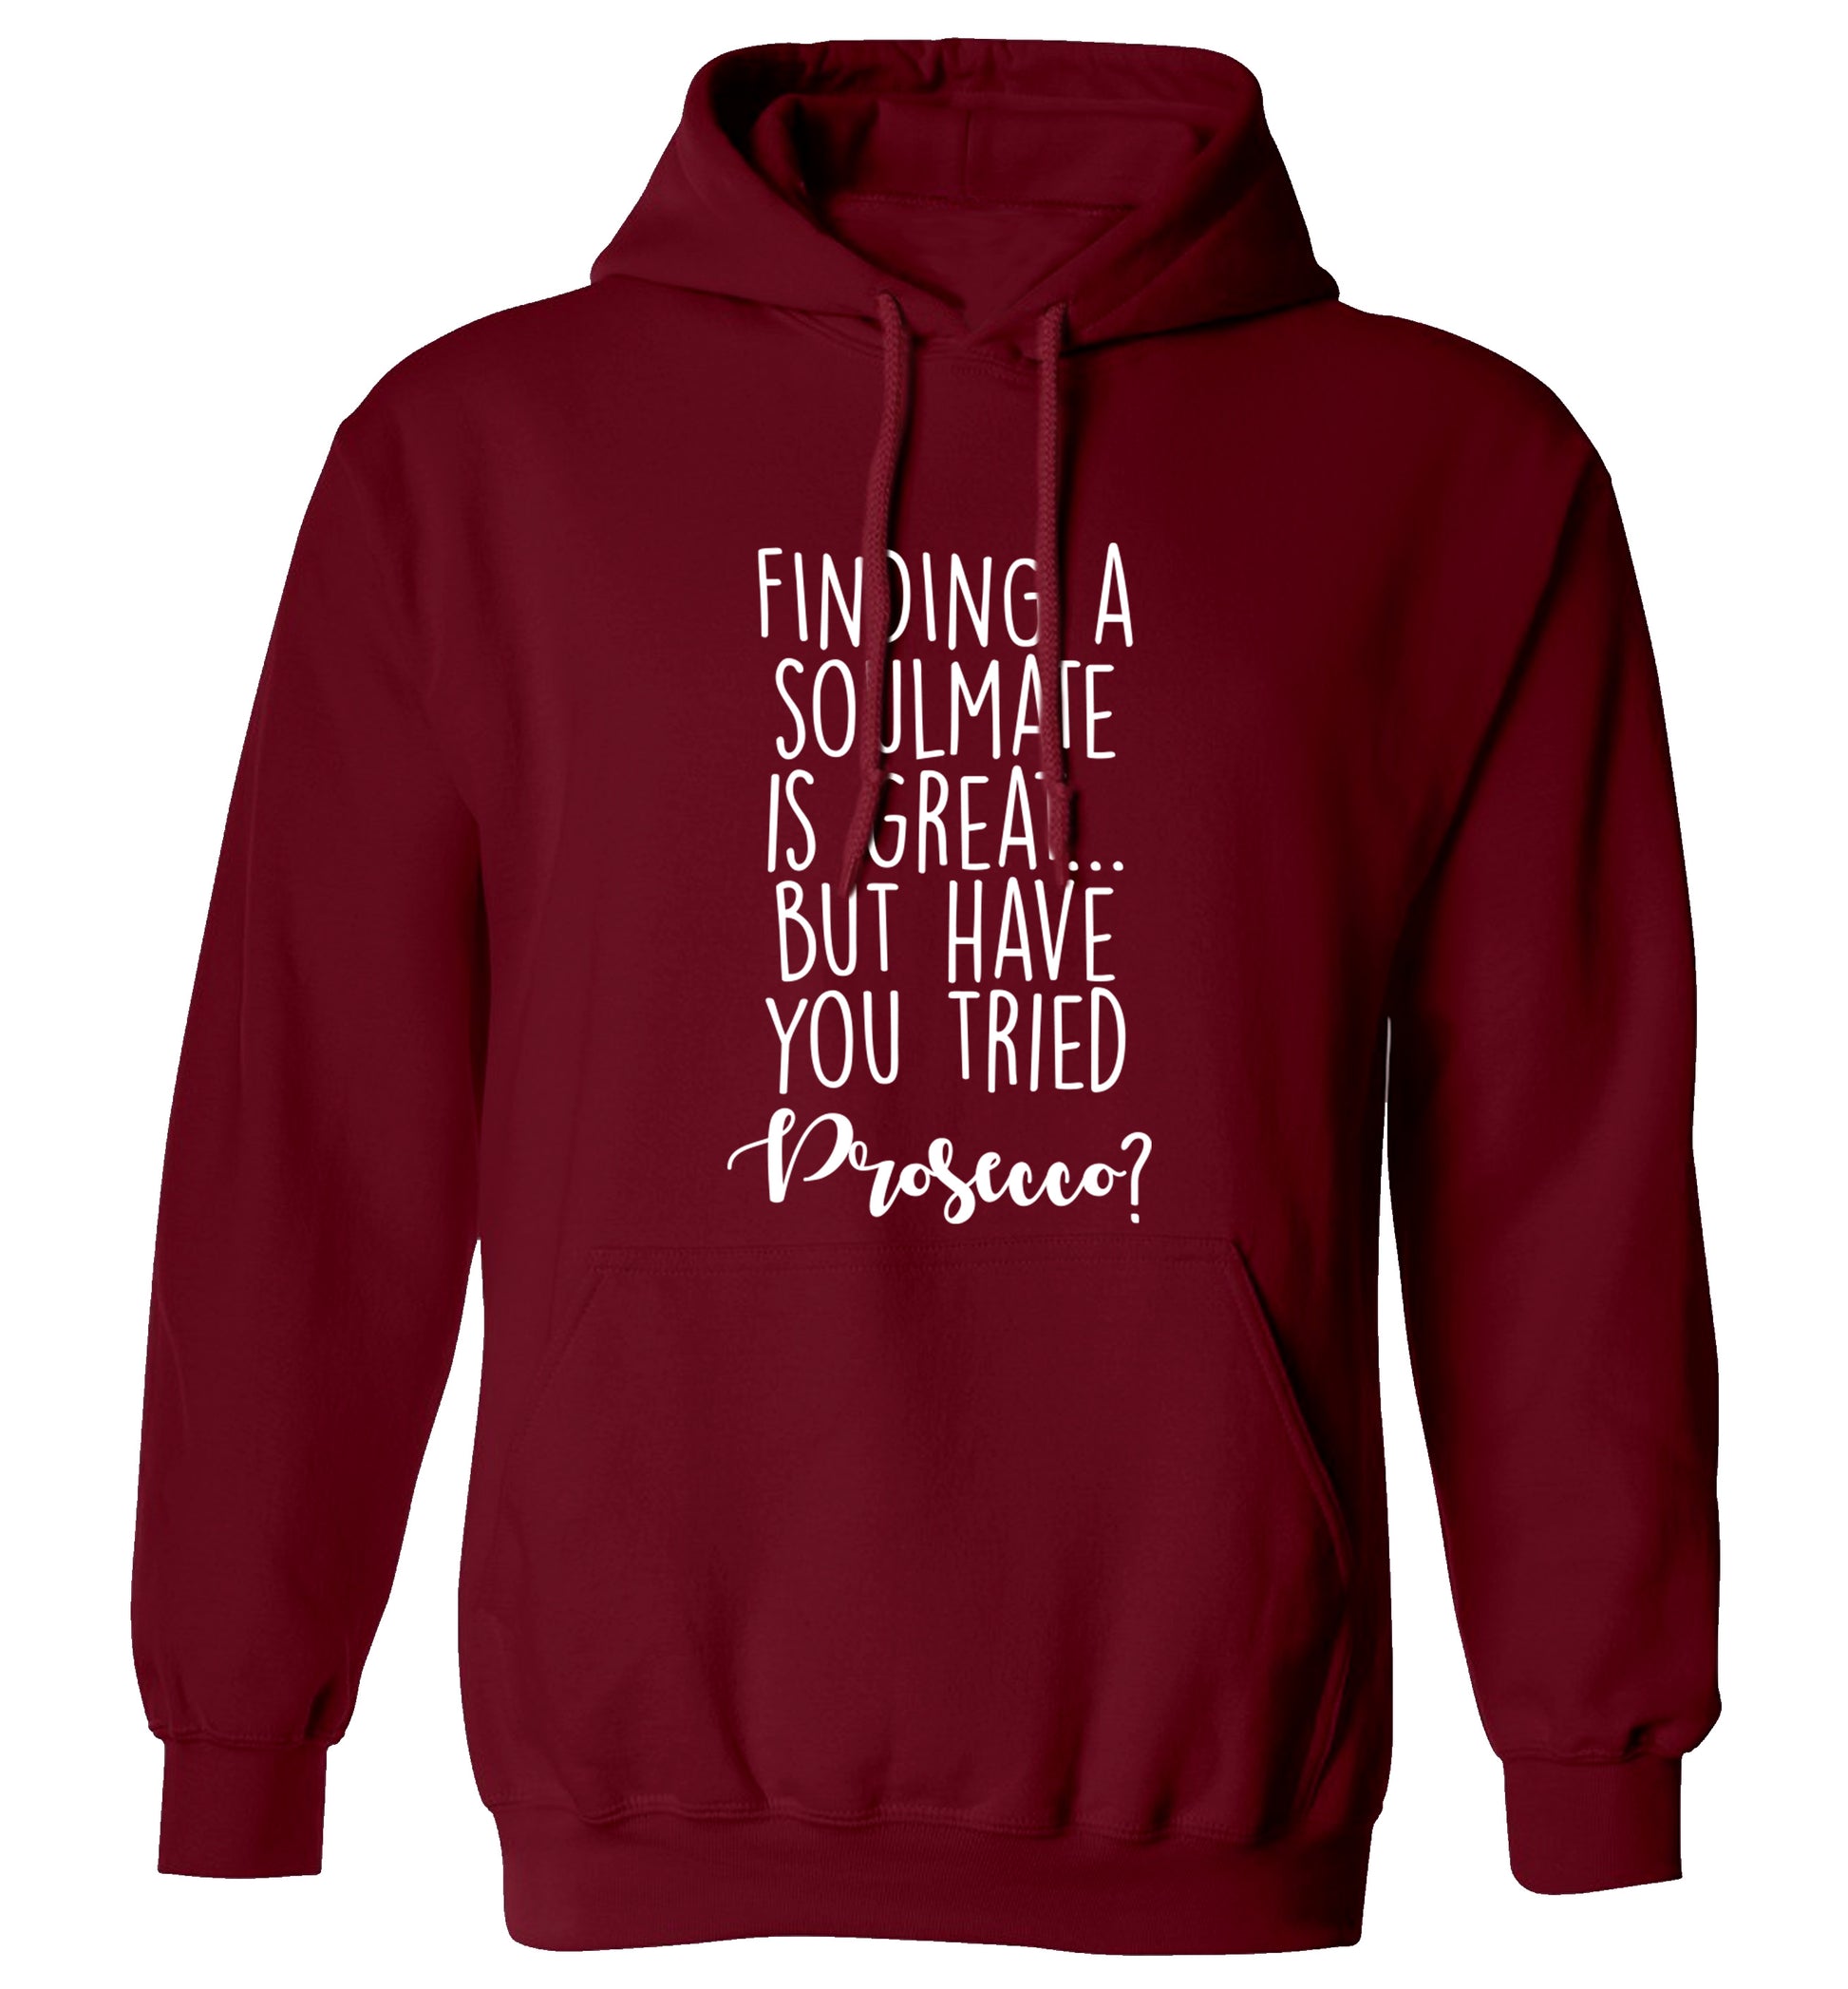 Finding a soulmate is great but have you tried prosecco? adults unisex maroon hoodie 2XL